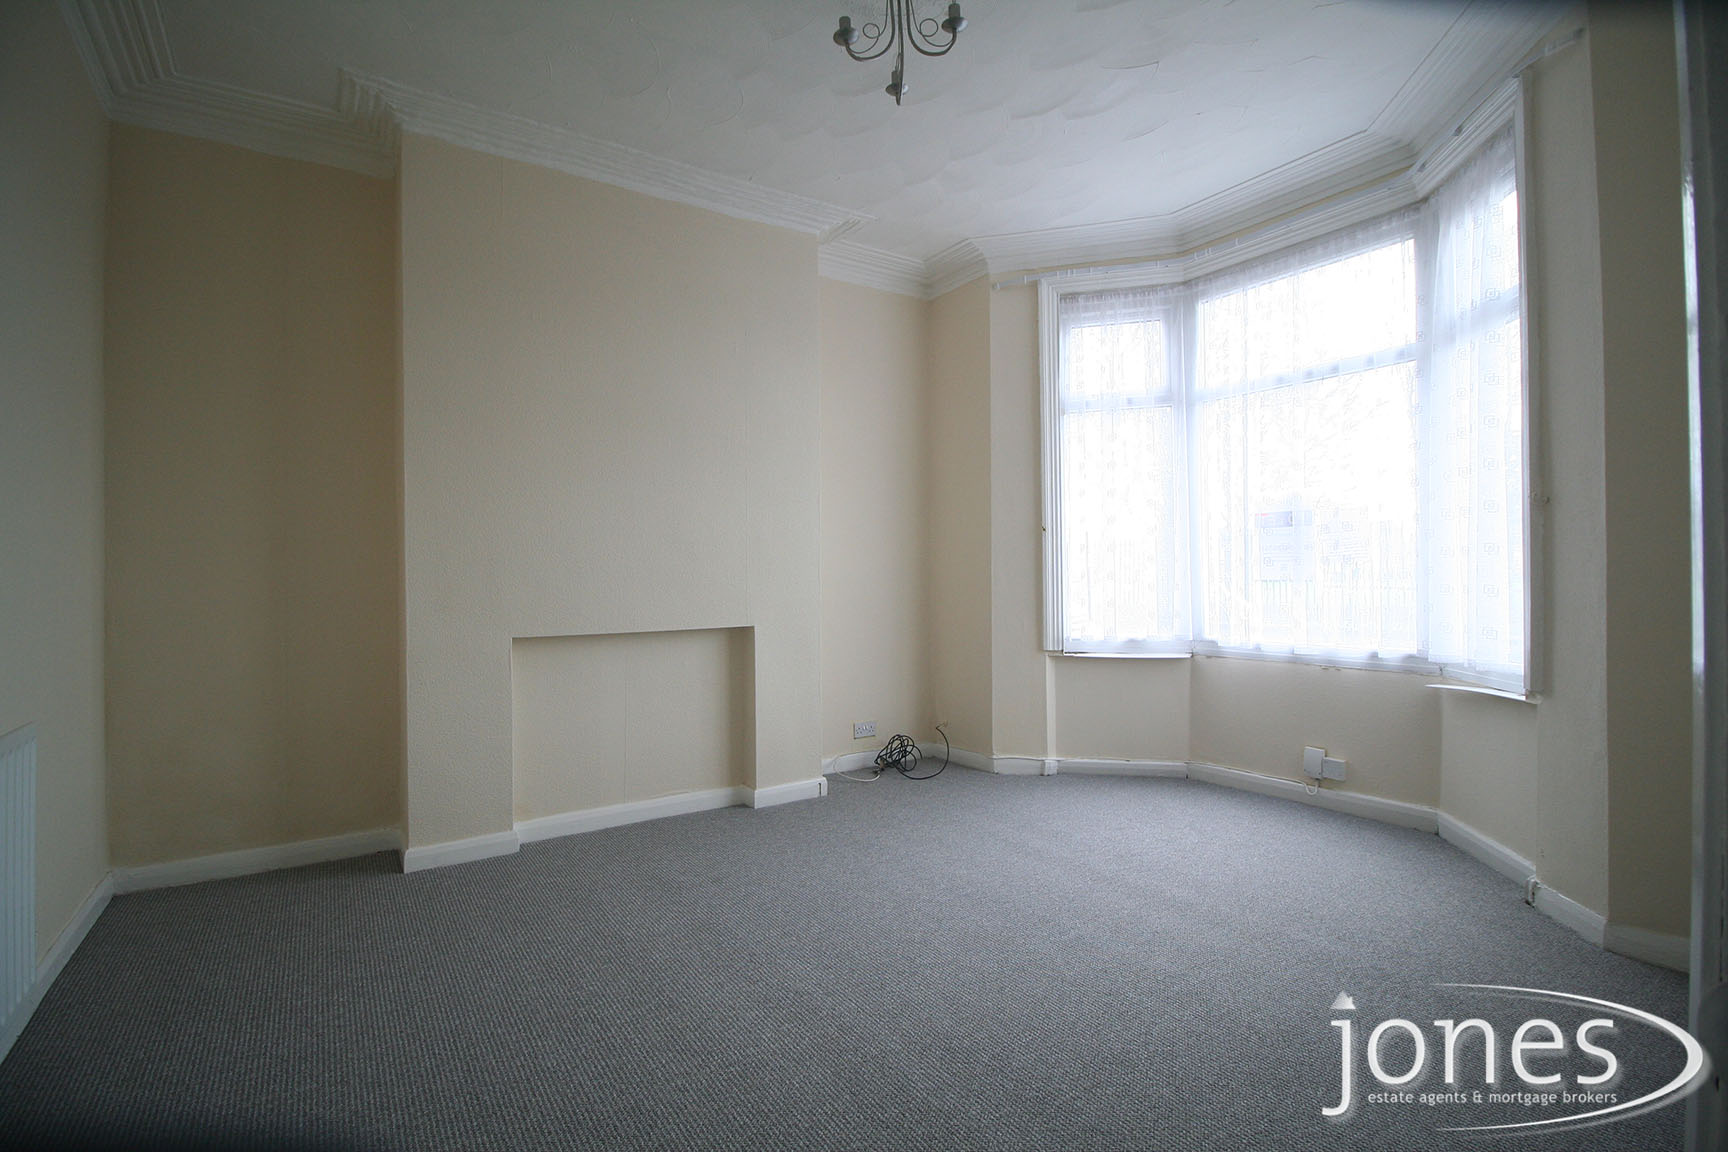 Home for Sale Let - Photo 02 Victoria Road, Thornaby, TS17 6HH